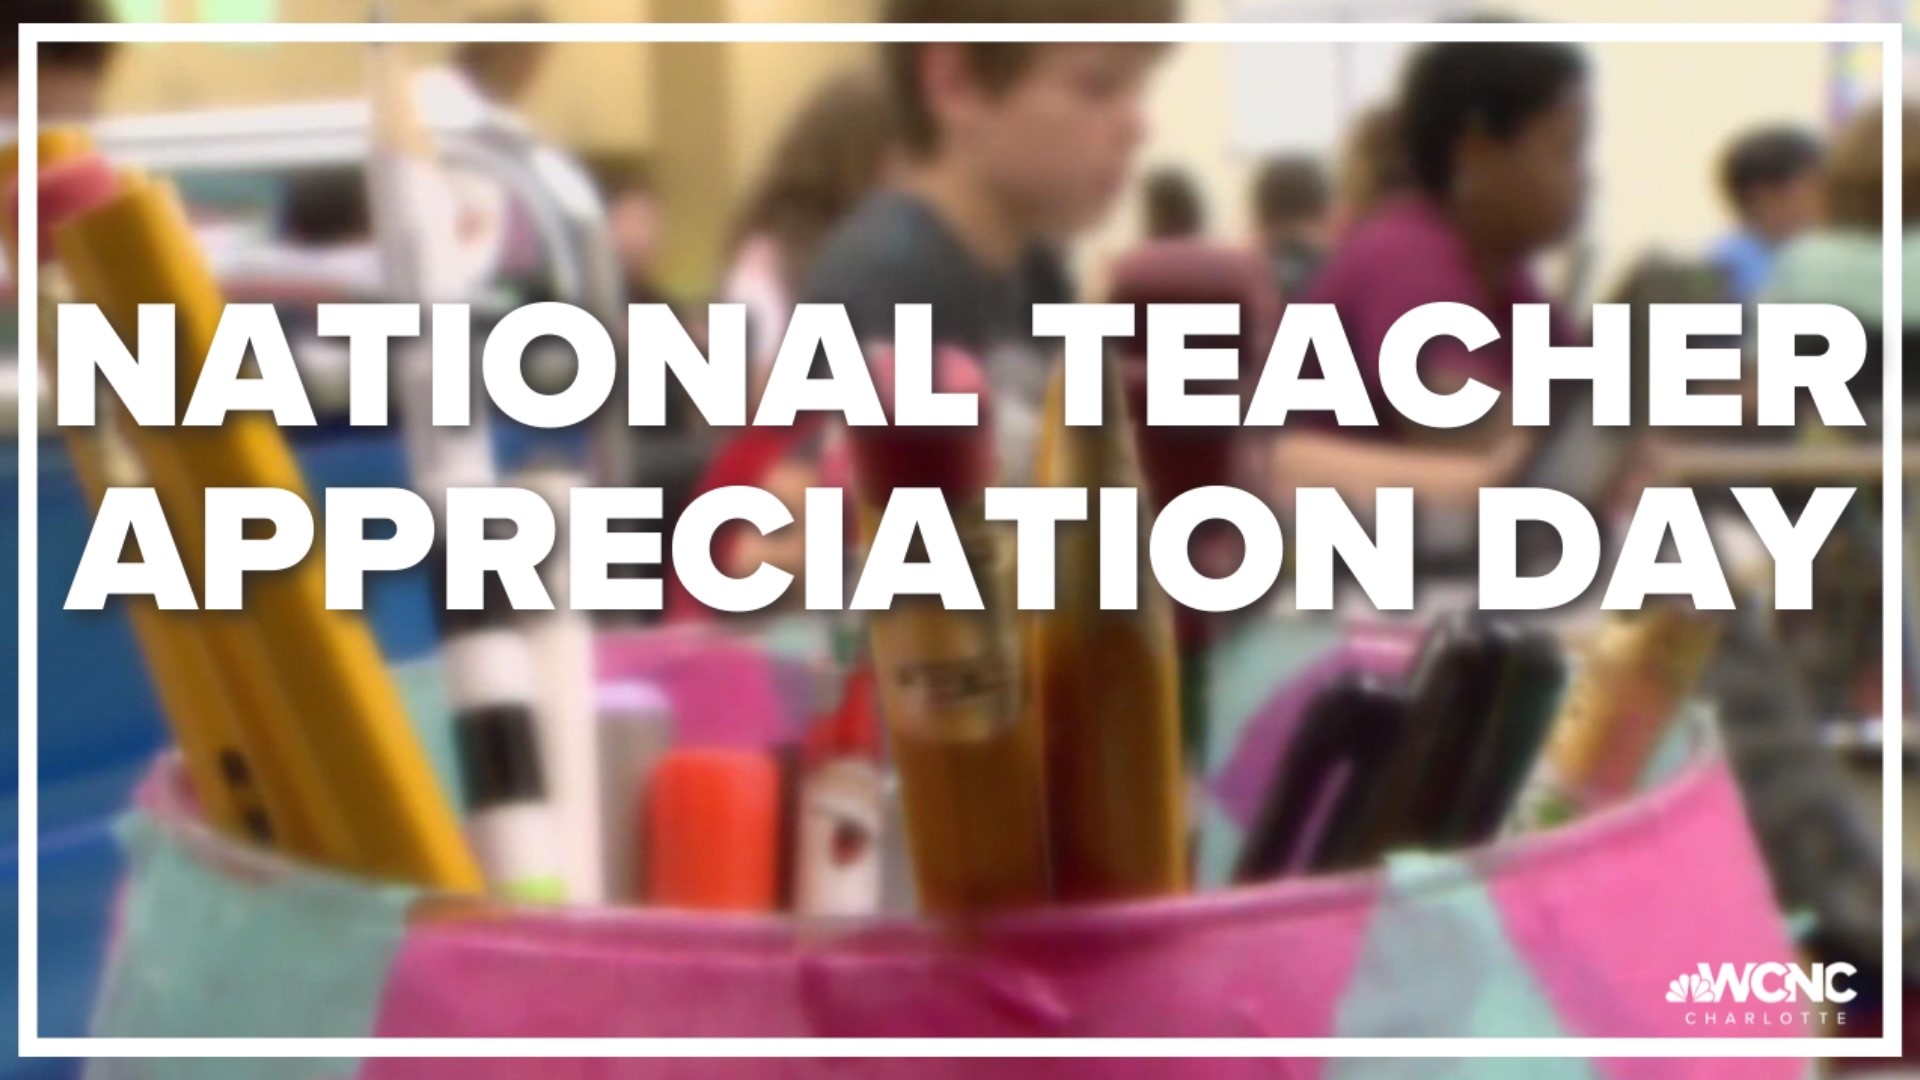 Now more than ever, it's critical to support our nation's teachers and thank them for everything they do for our kids.